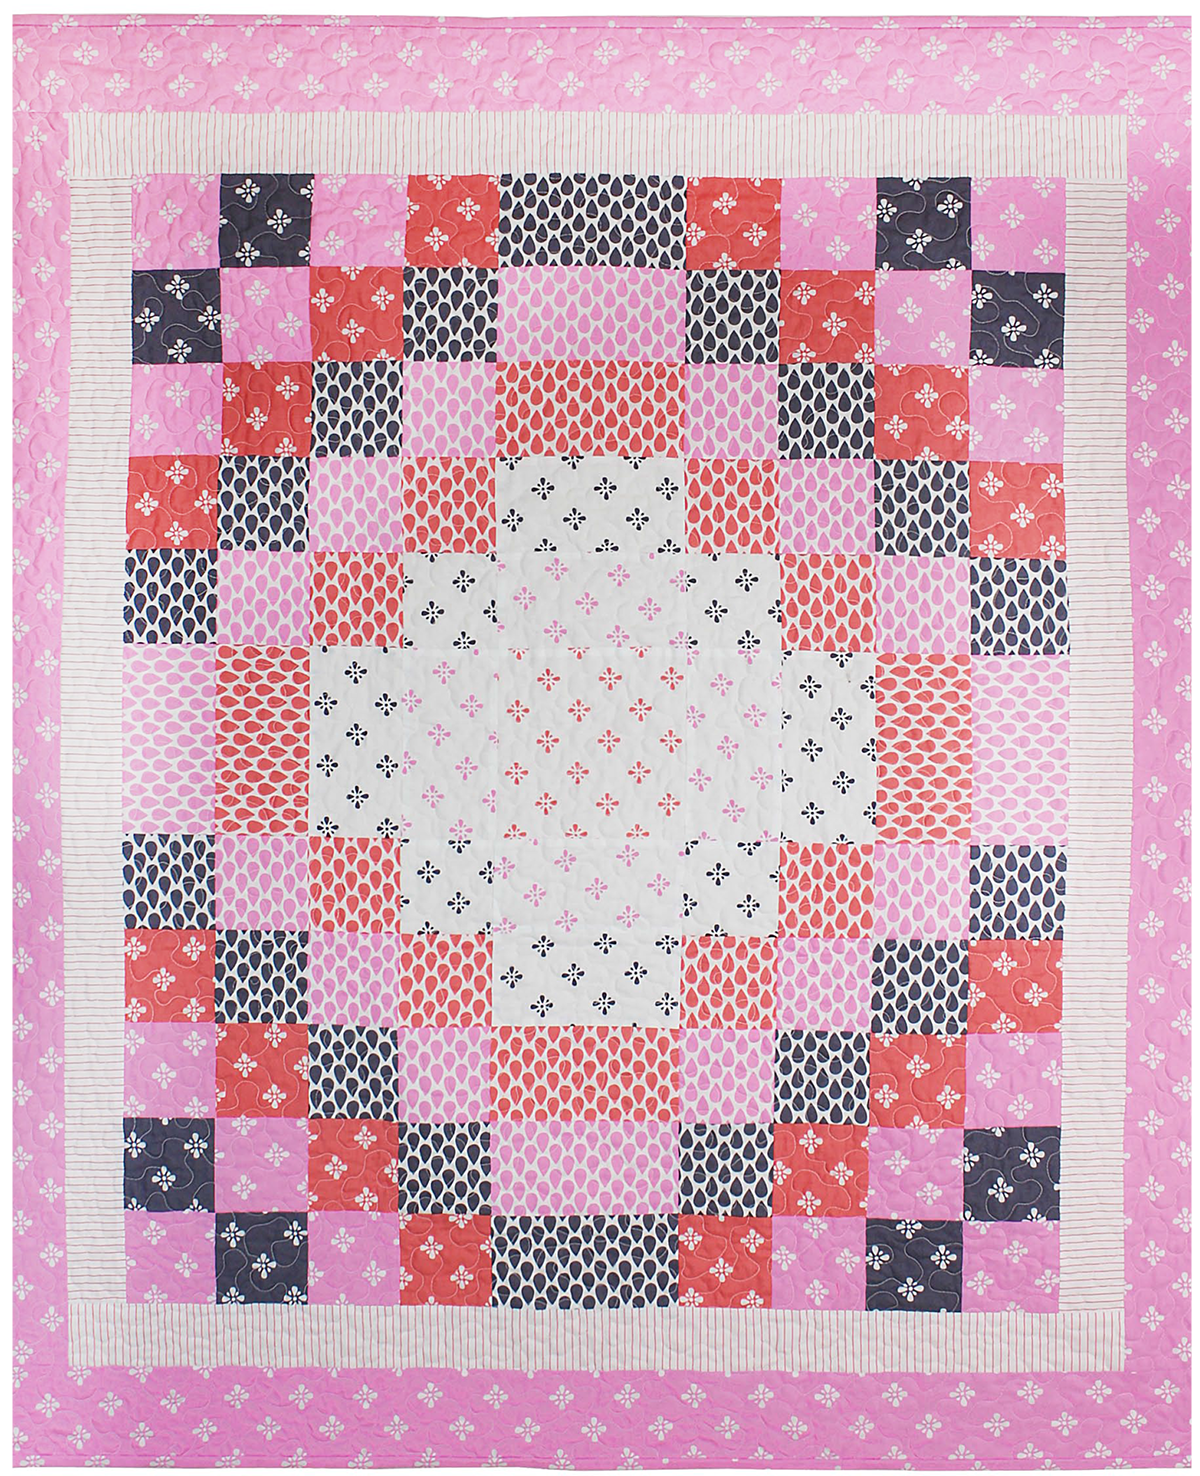 Quilt Inspiration: Free pattern day: Baby quilts! (part 2)